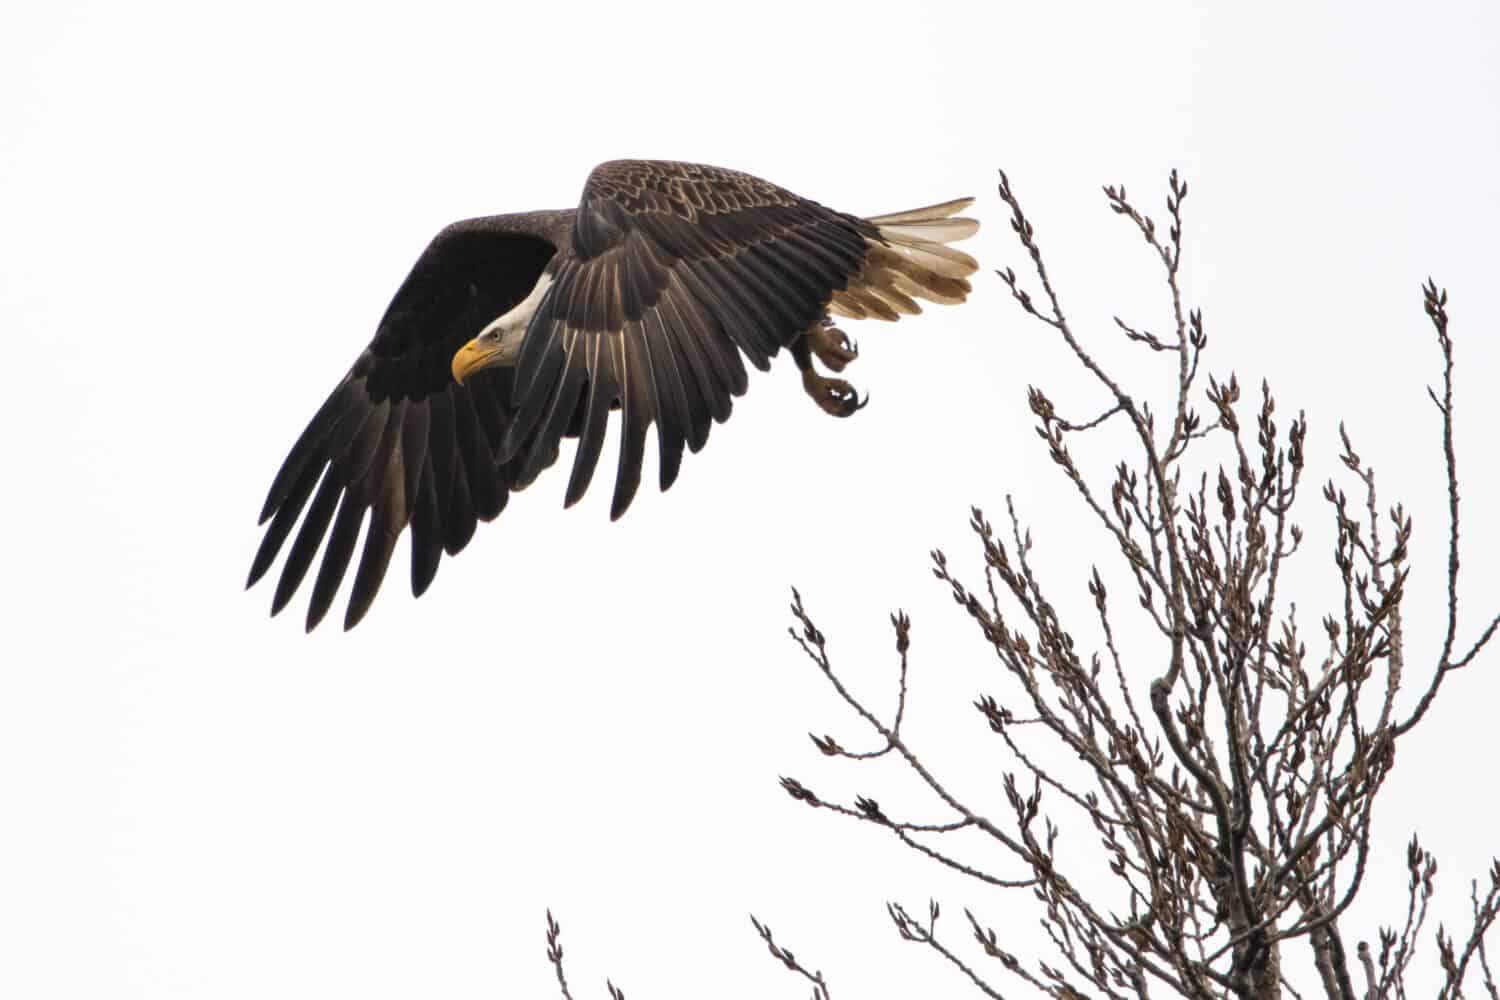 Bald eagle taking off on reelfoot lake state park in Tennessee